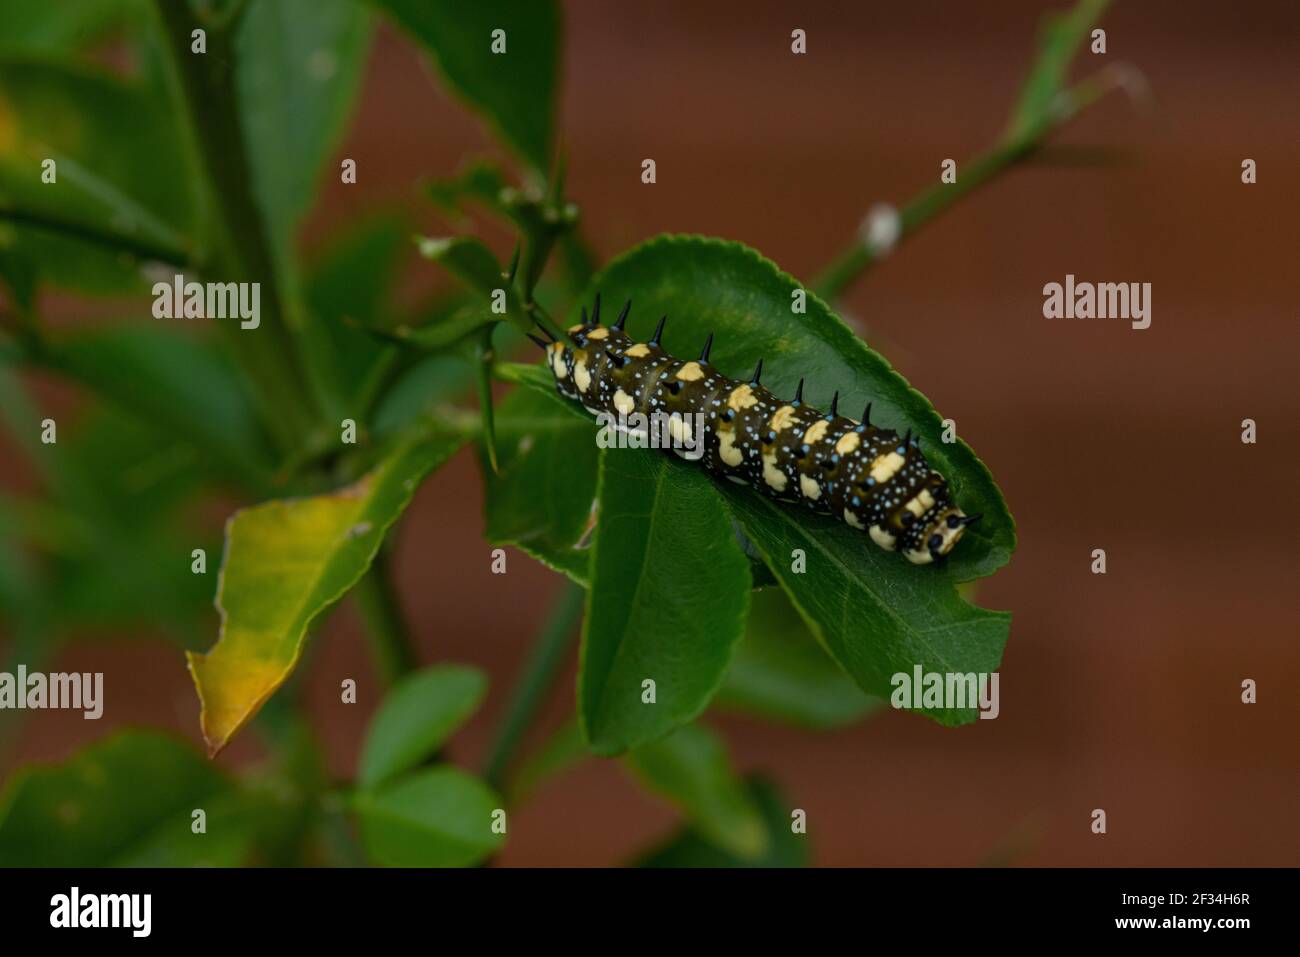 Young Larva or caterpillar of Citrus orchard butterfly. Stock Photo